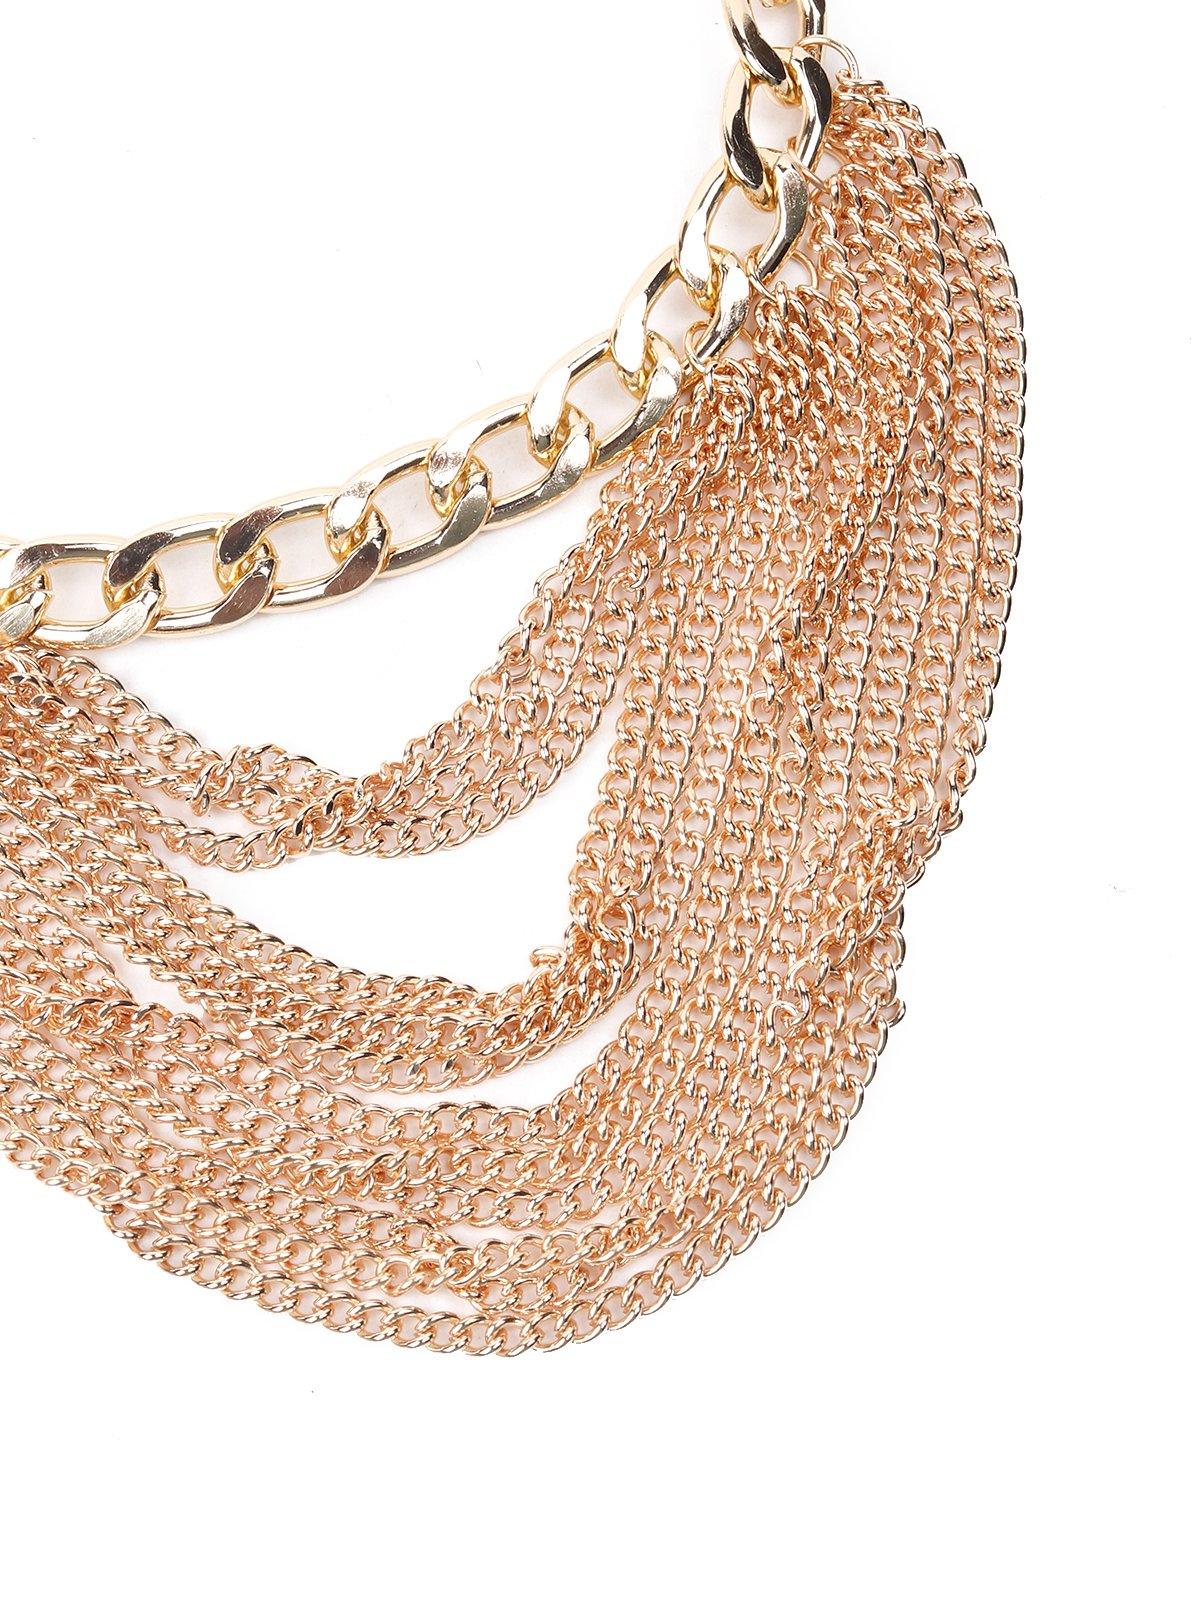 Women's Chunky Gold Tone Necklace - Odette